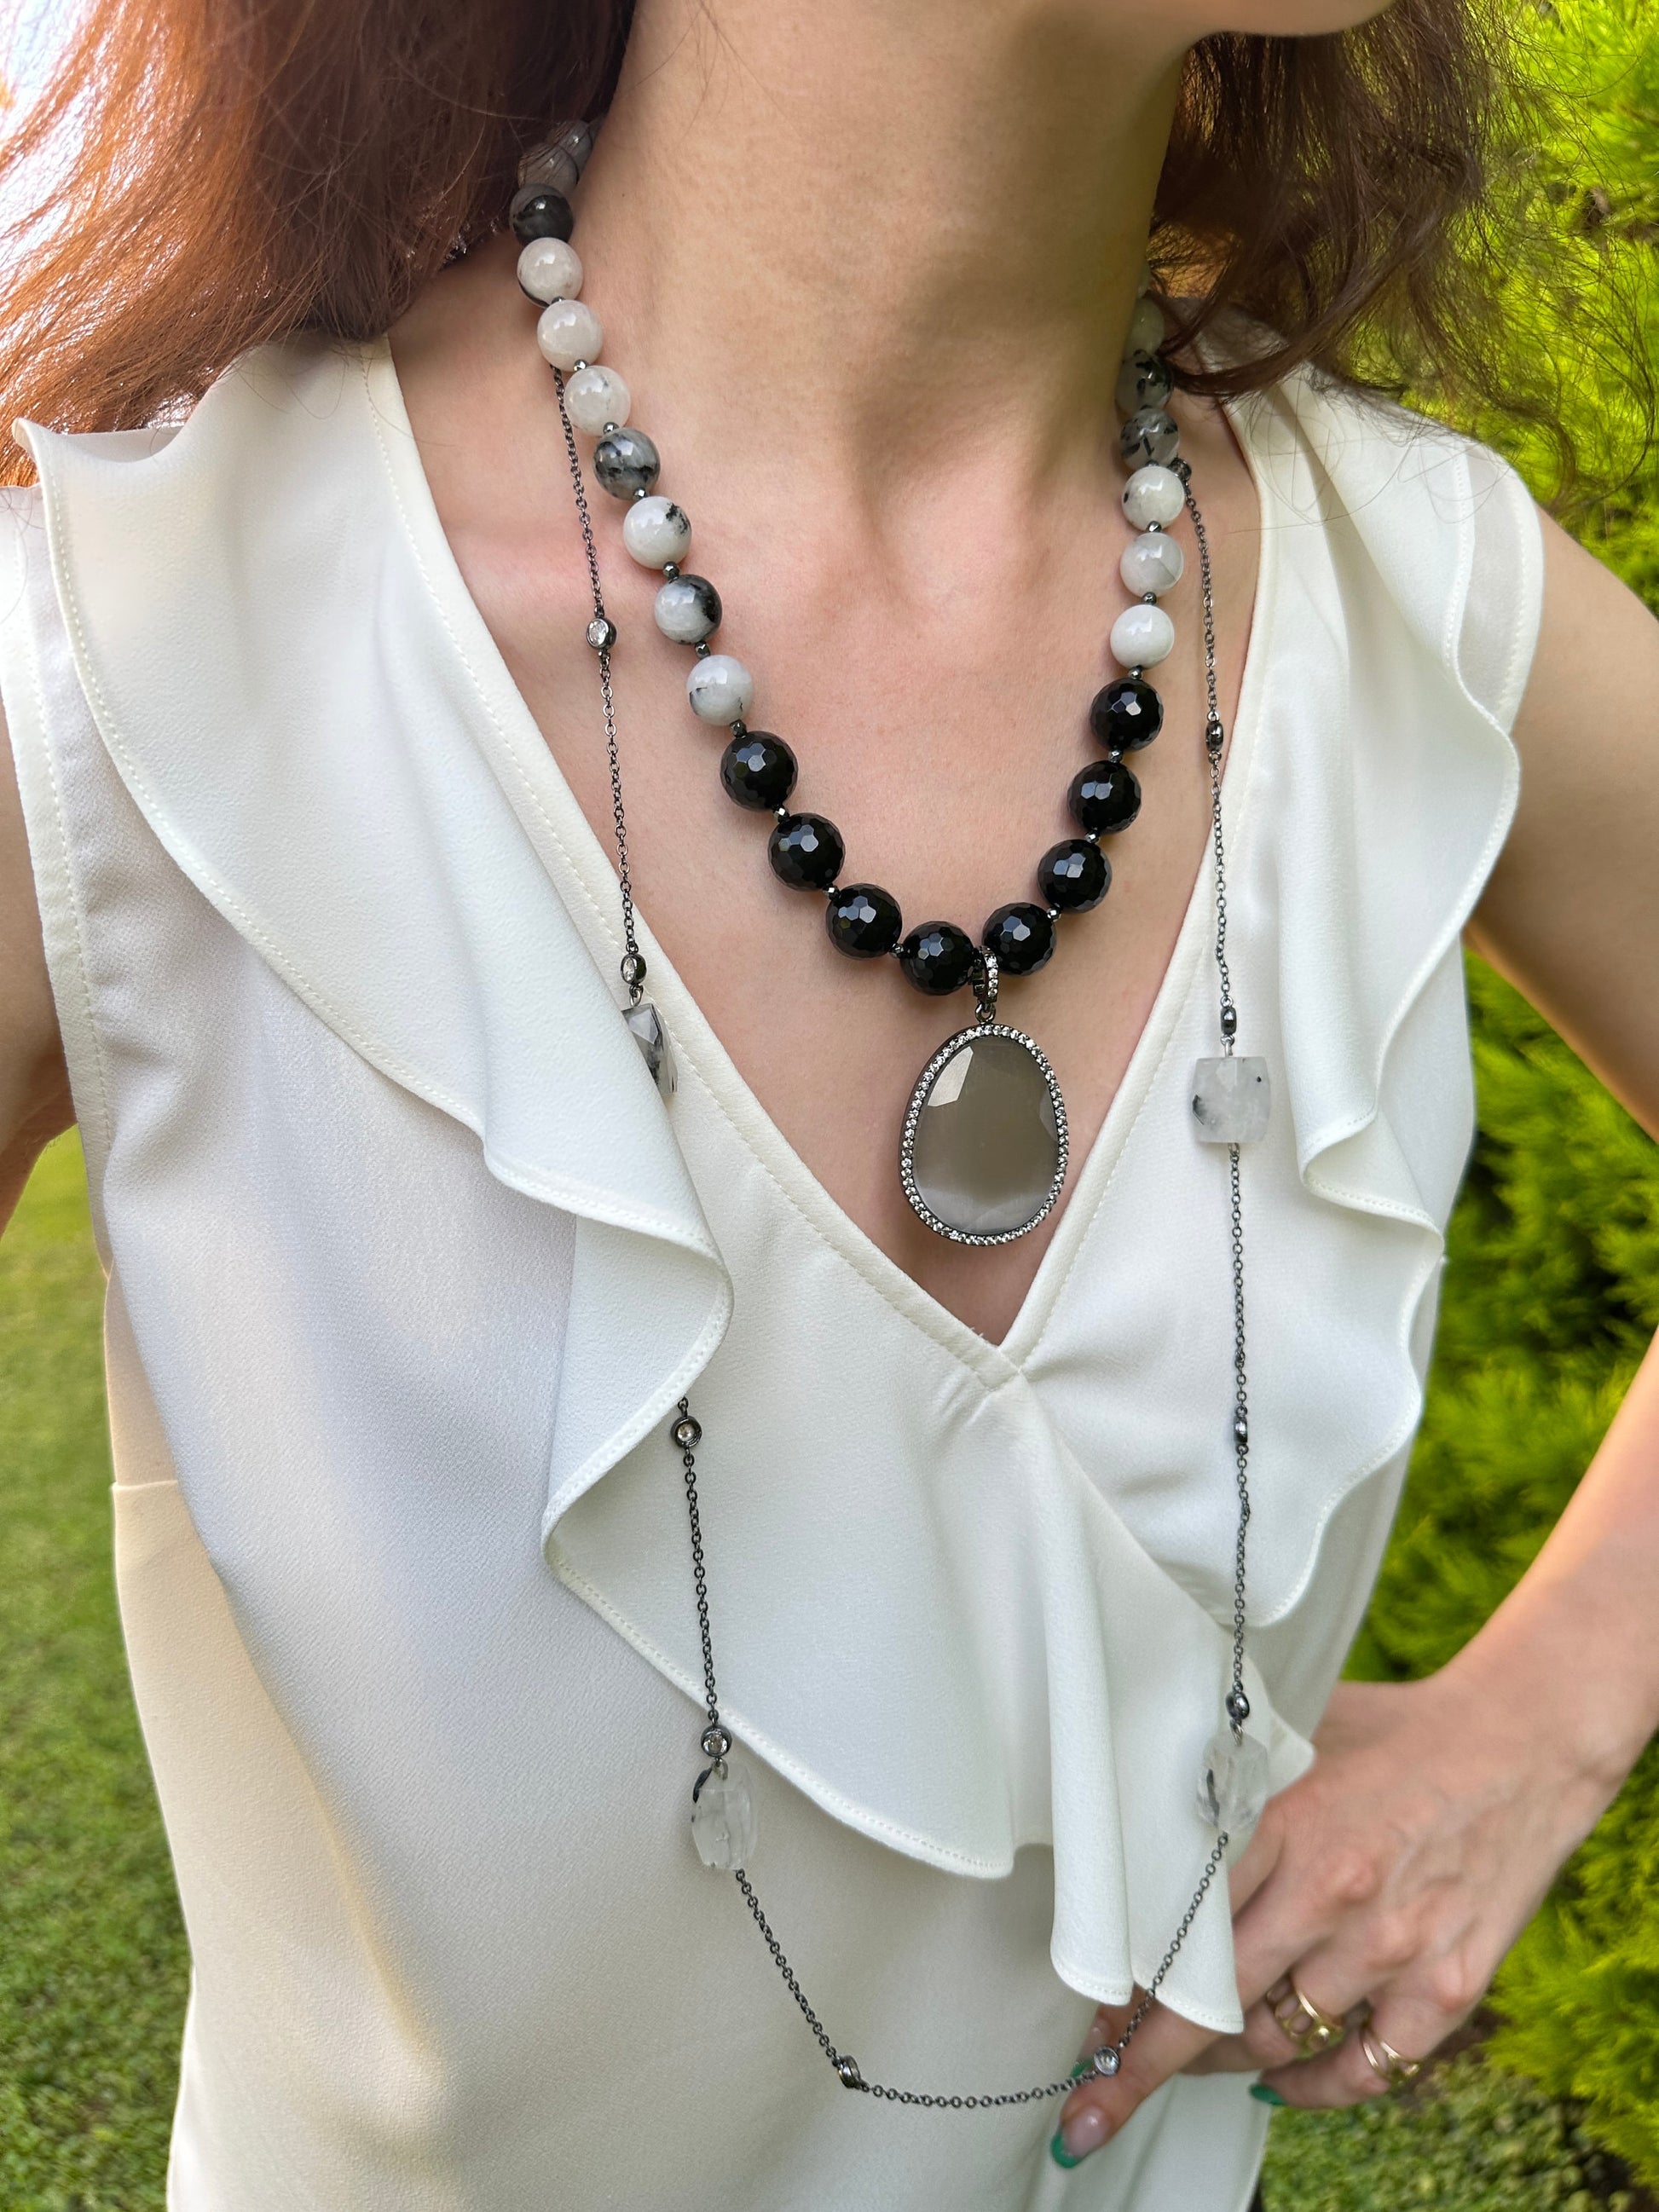 Onyx and Rutile Quartz Necklace, Big Bold Large Statement Necklace, Black Gray Gemstone Jewelry, Wife Birthday Gift, Chain Necklace